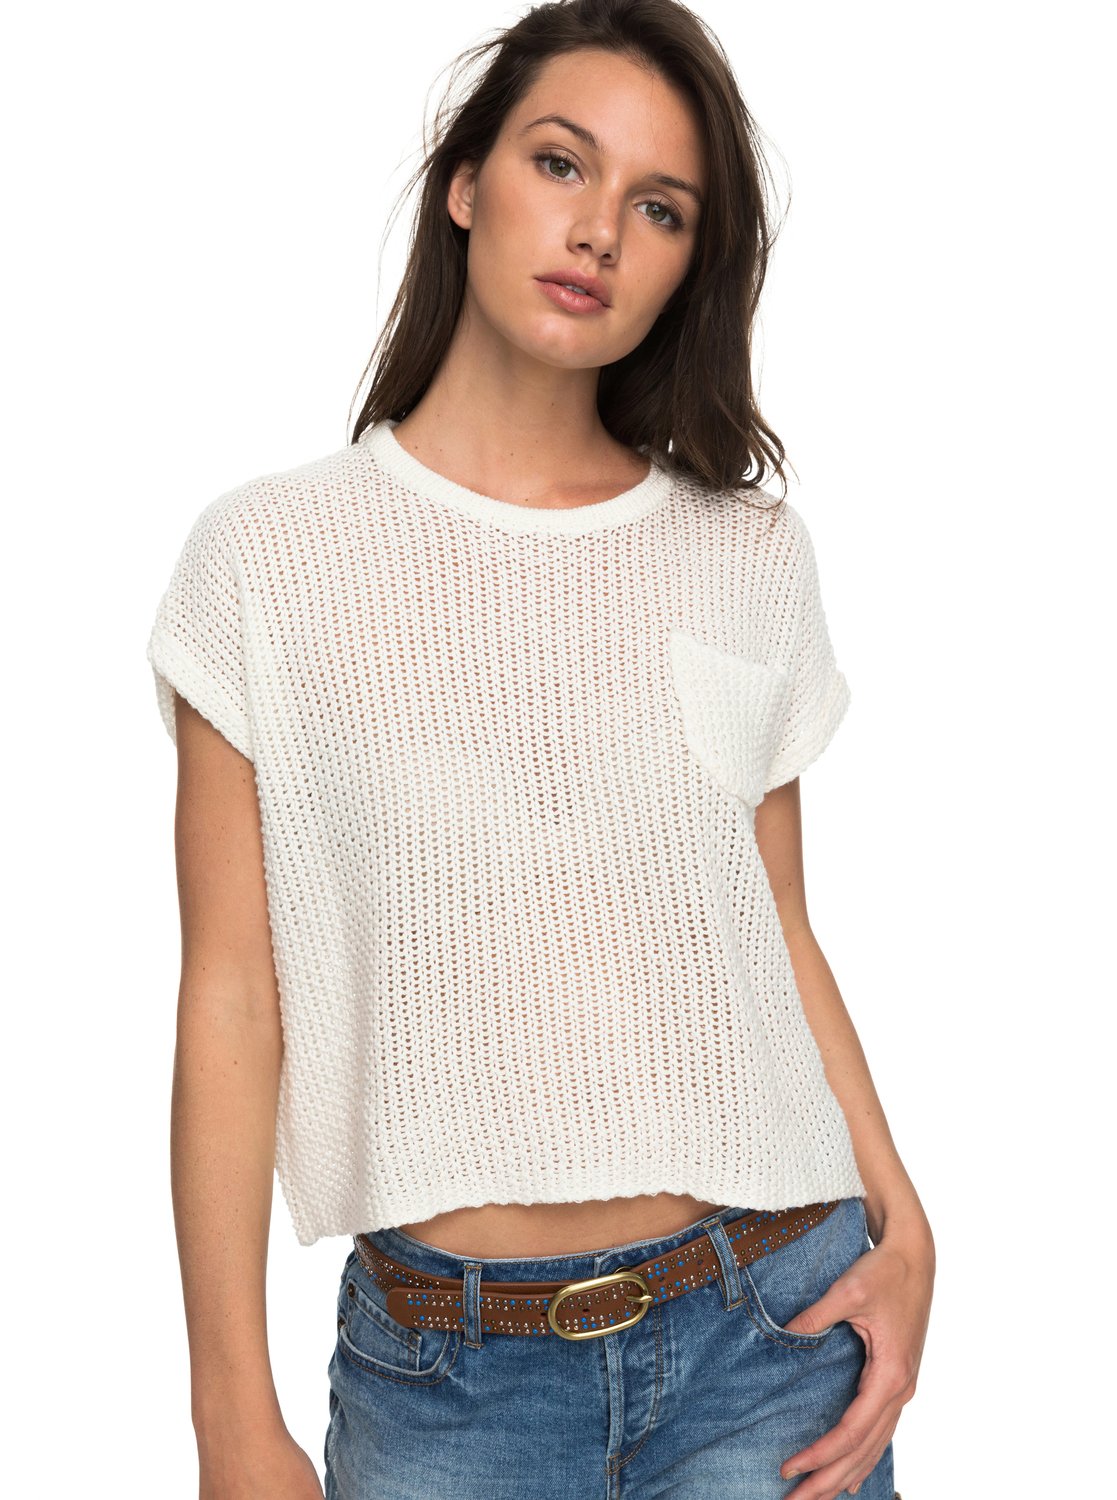 Breezy Days - Knitted Top for Women 3613373352316 | Roxy